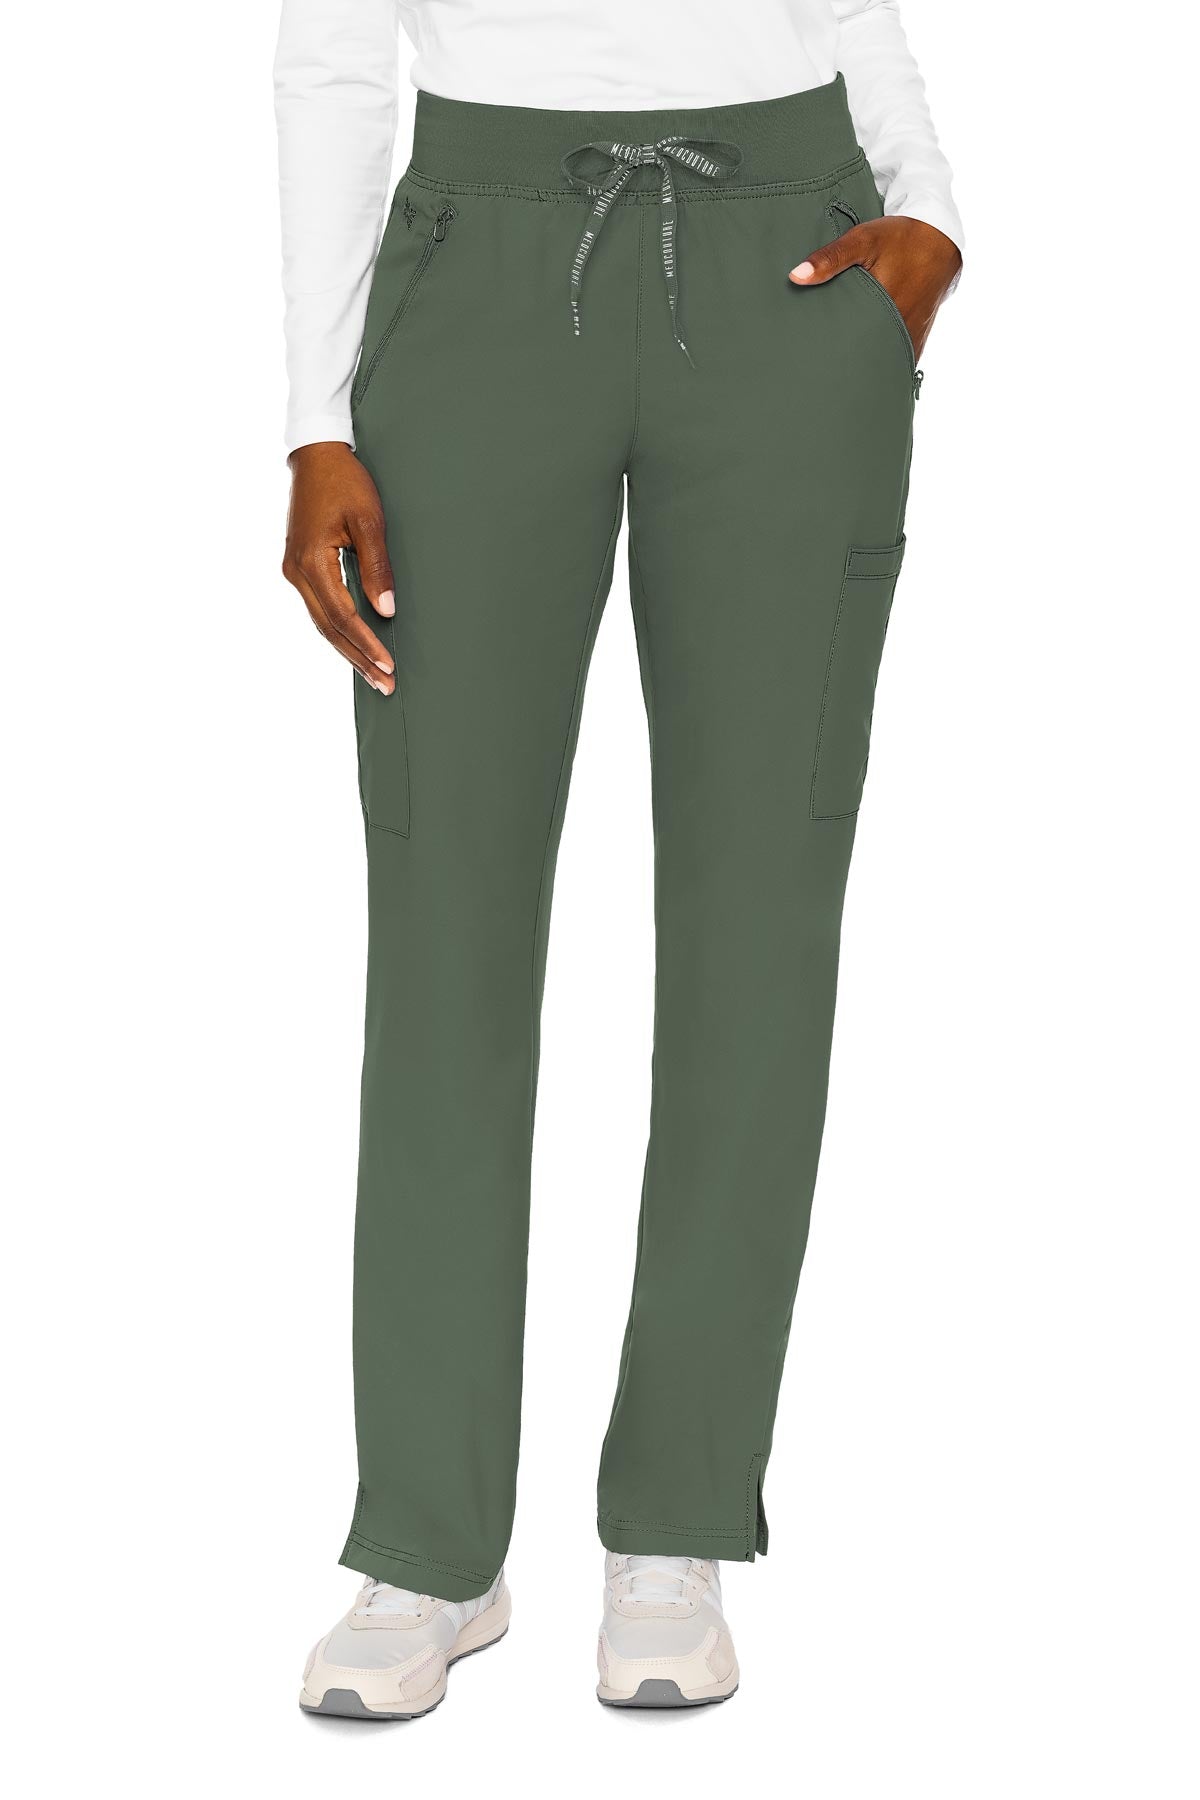 Med Couture Tall Scrub Pants Insight Zipper Pant in Olive at Parker's Clothing and Shoes.